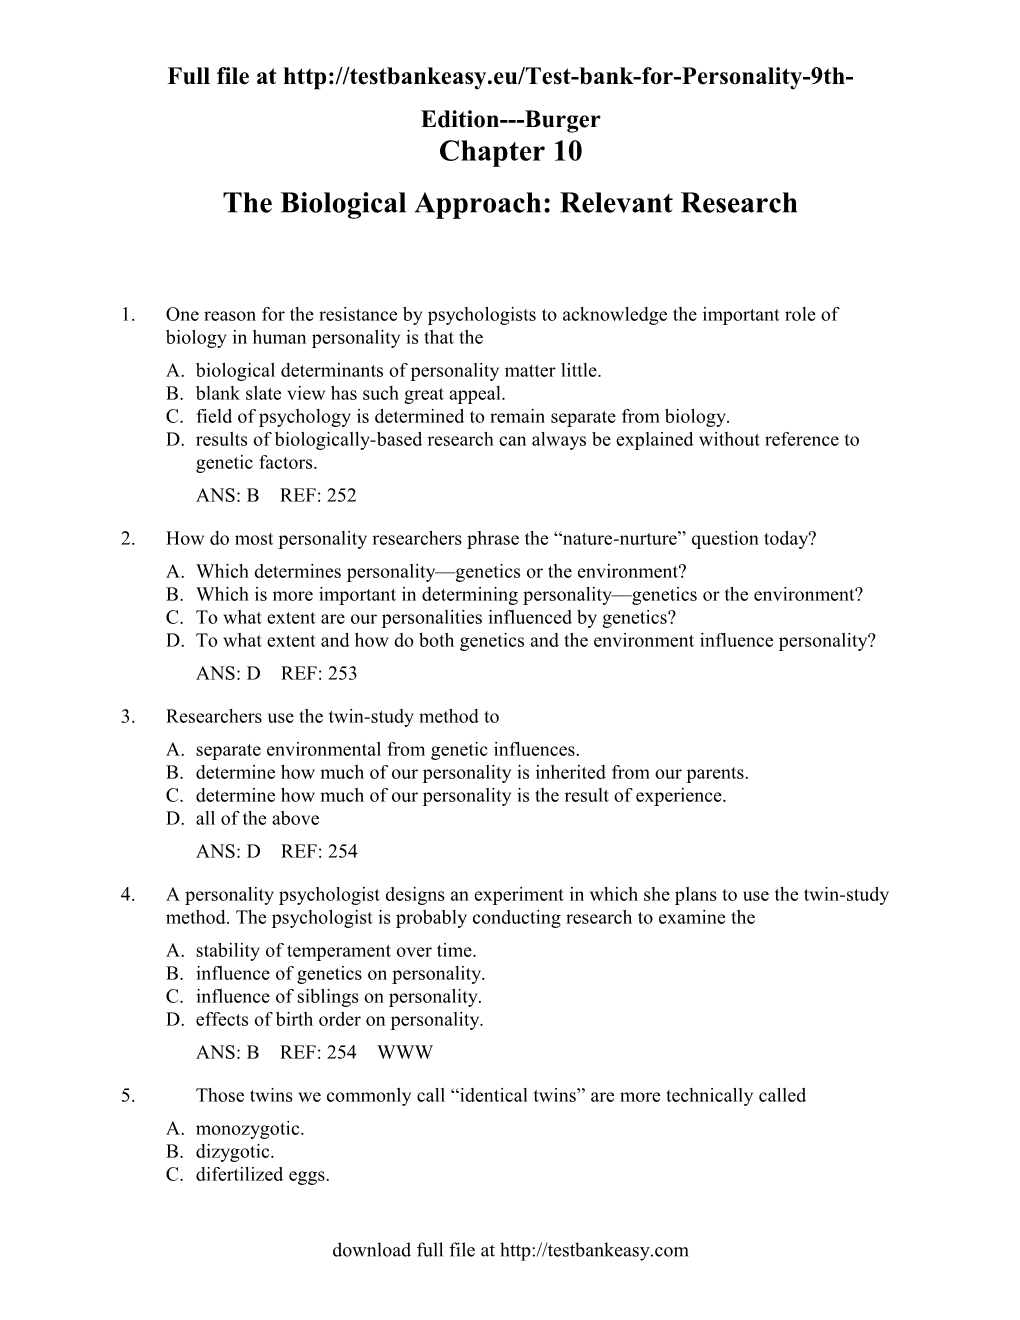 The Biological Approach: Relevant Research